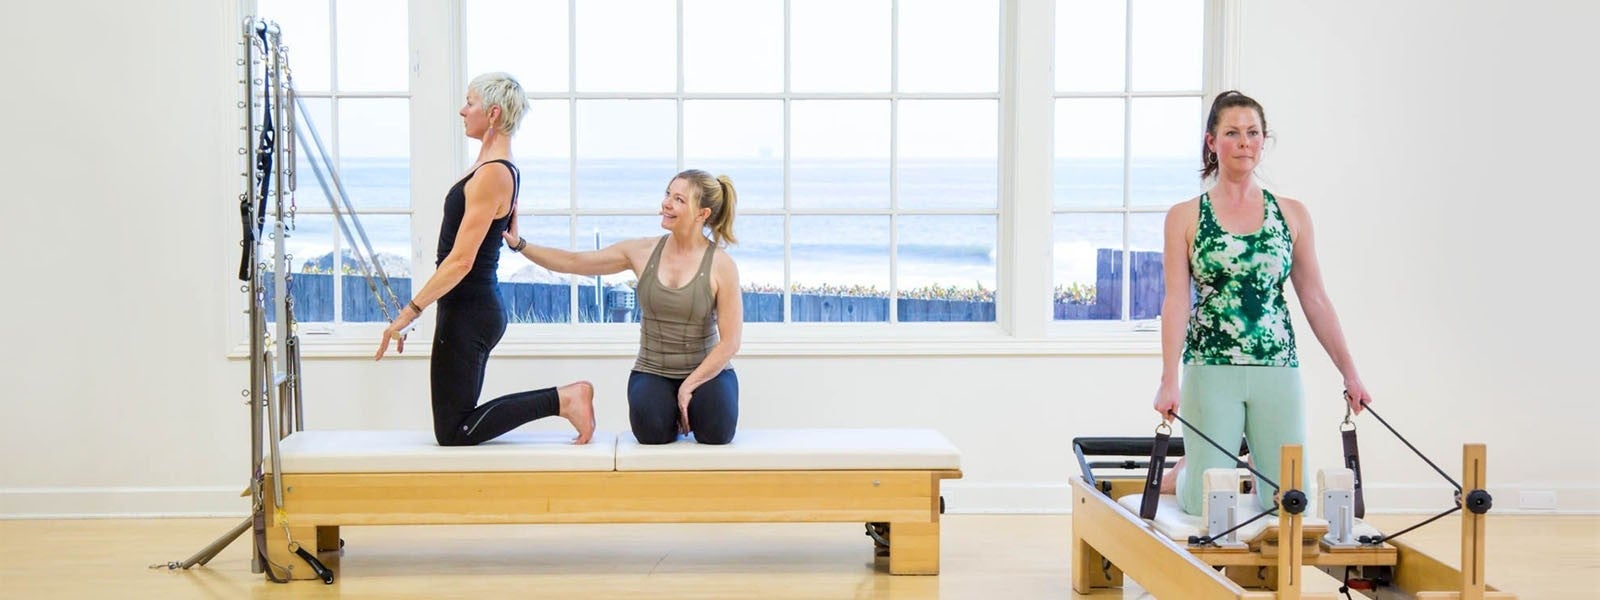 REFORMER TRAPEZE COMBINATION Pilates reformer By